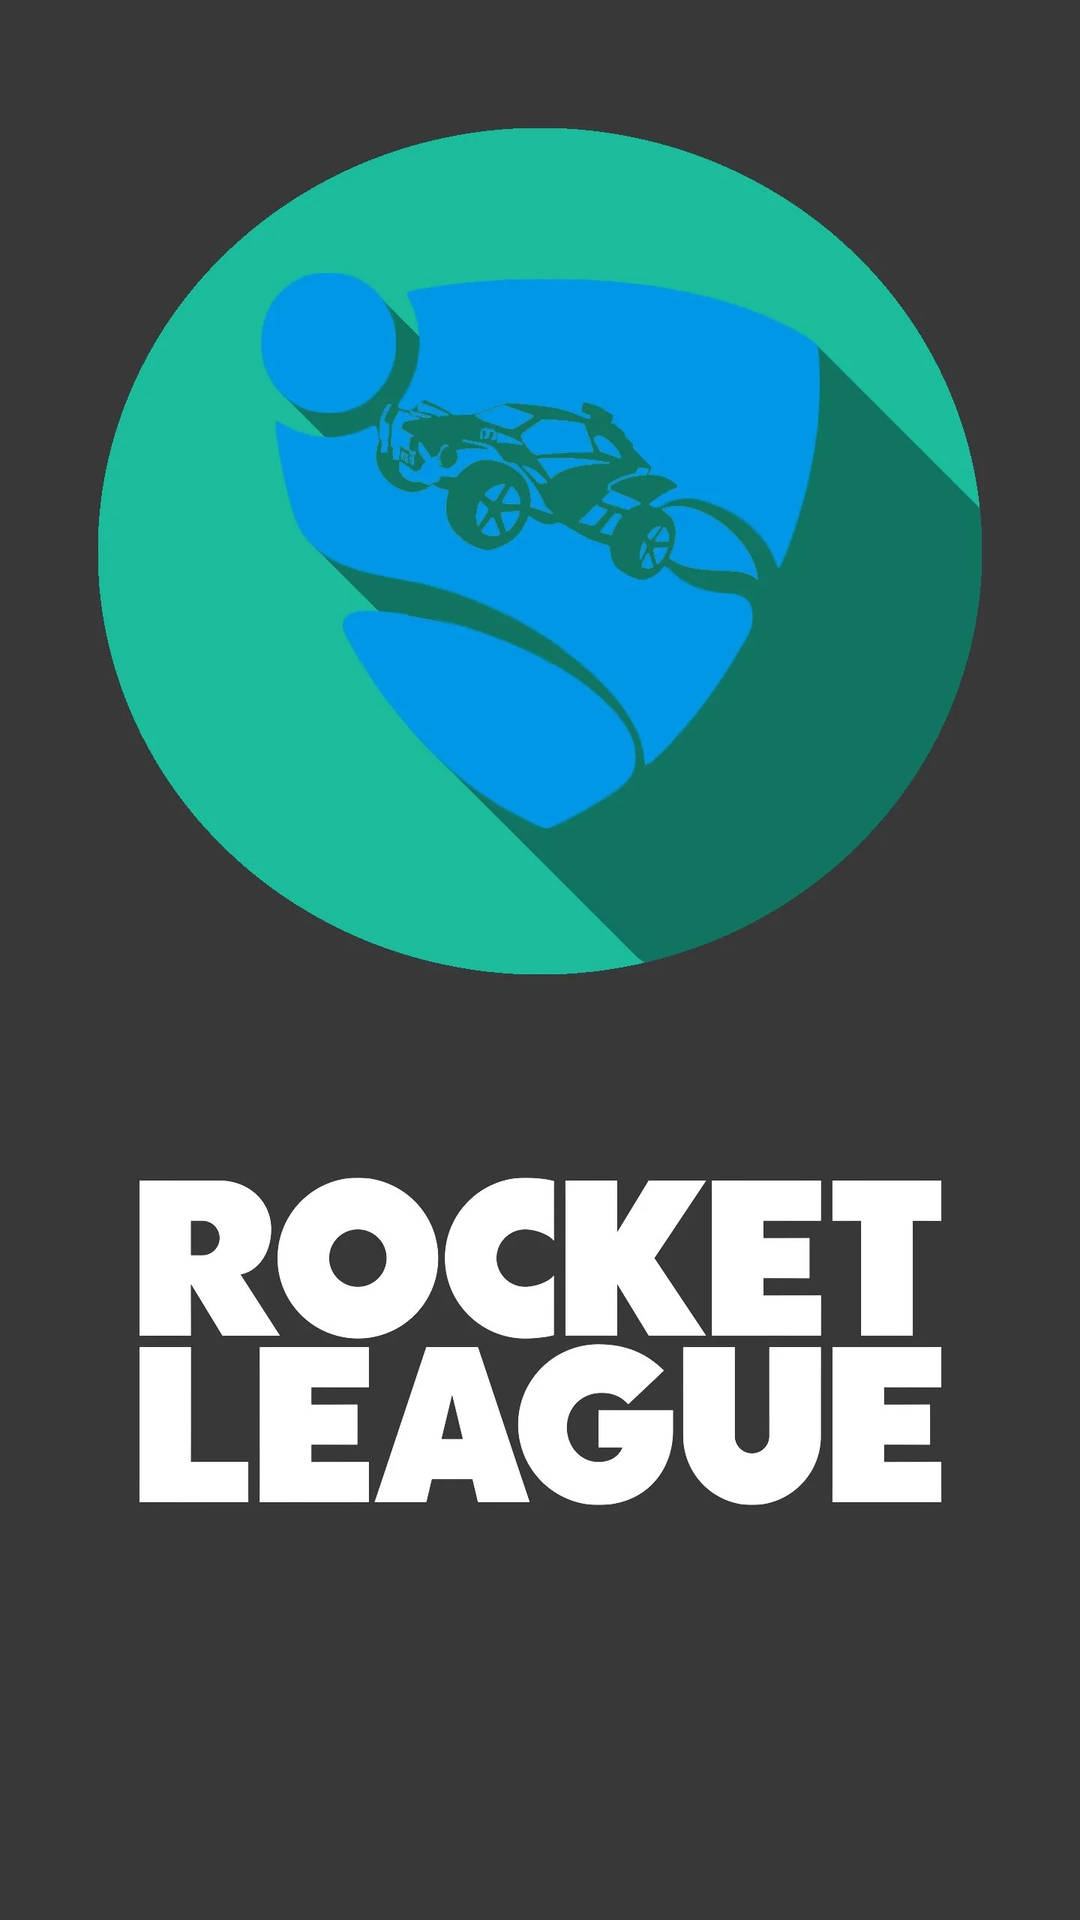 Don't Miss a Moment of Competitive Gaming with the Rocket League Phone! Wallpaper